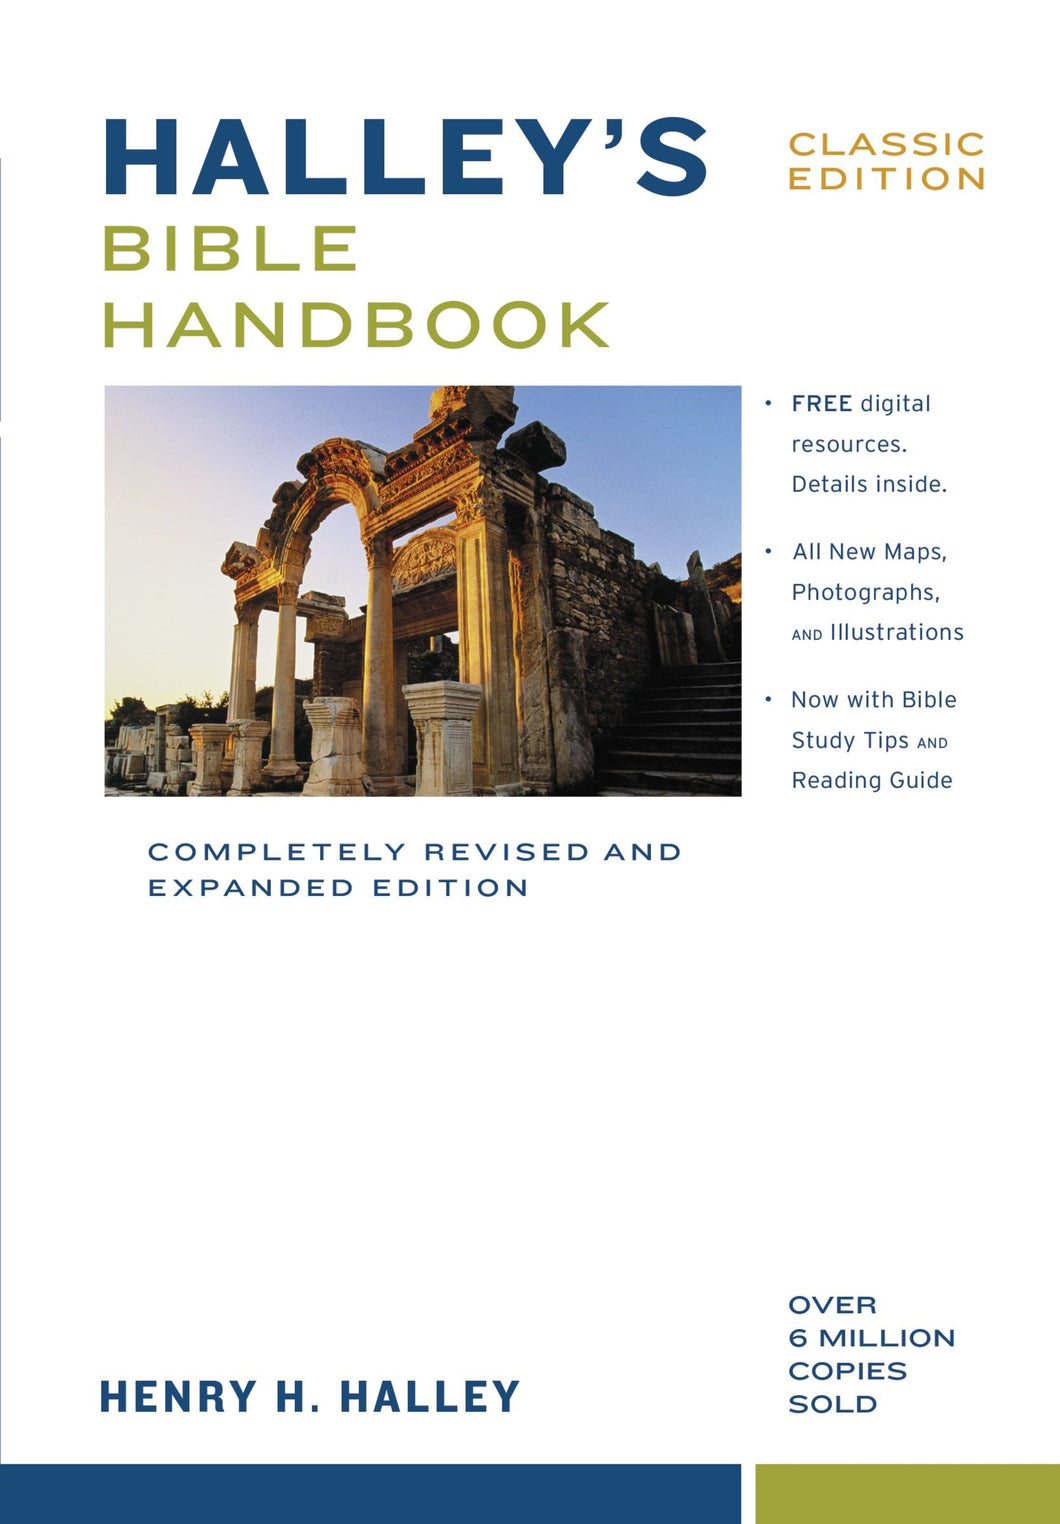 Halley's Bible Handbook: Classic Edition (Revised & Expanded)